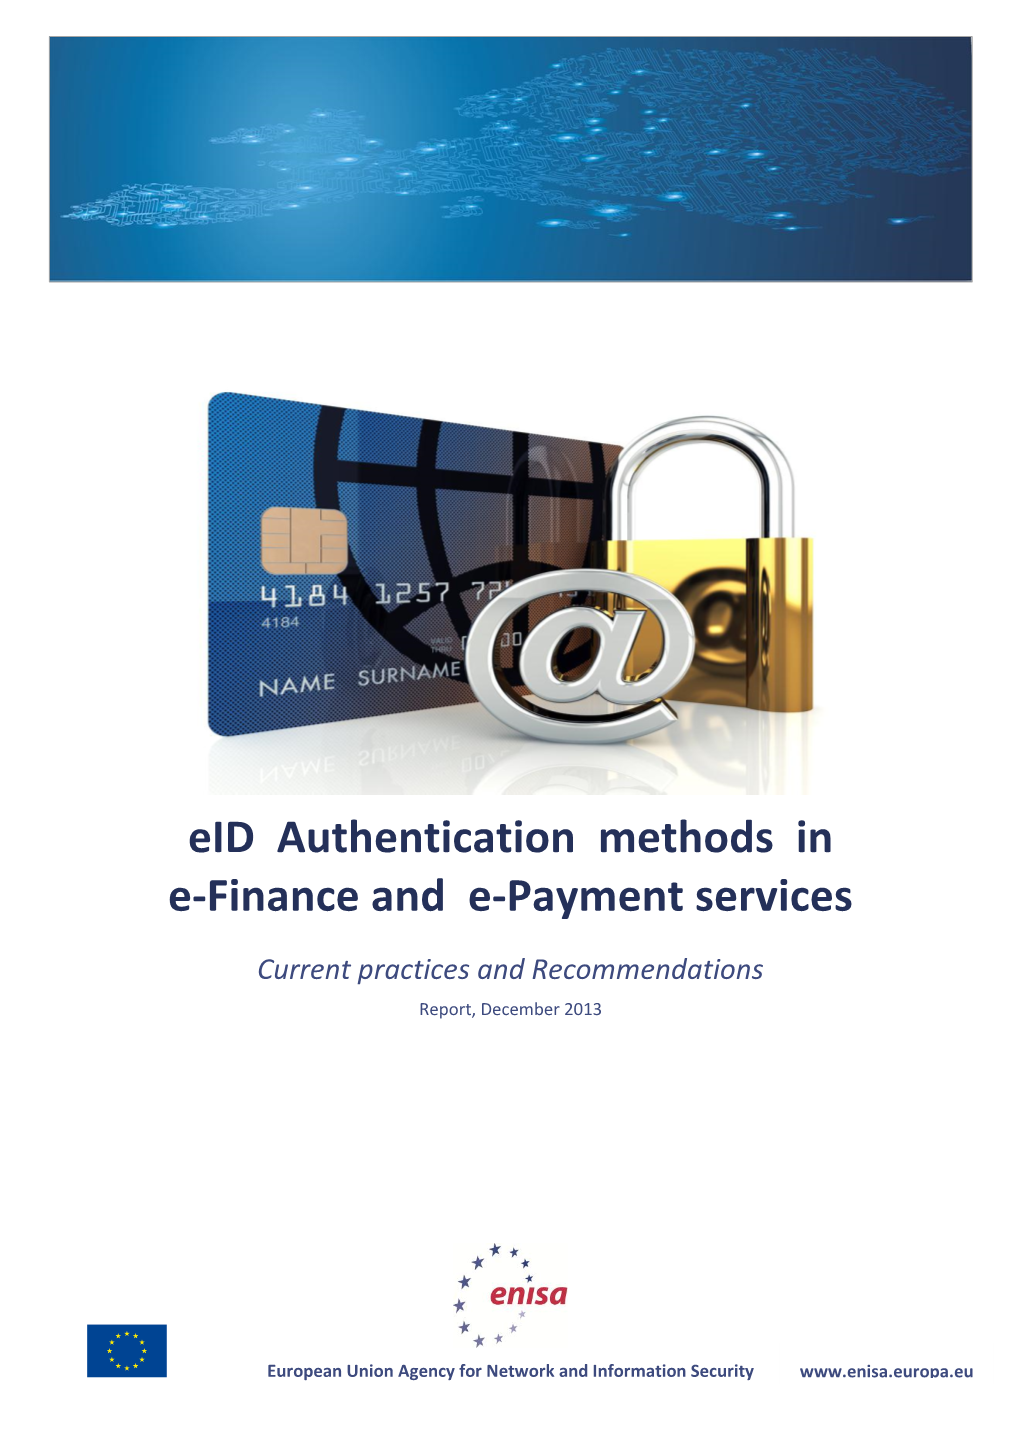 Eid Authentication Methods in E-Finance and E-Payment Services